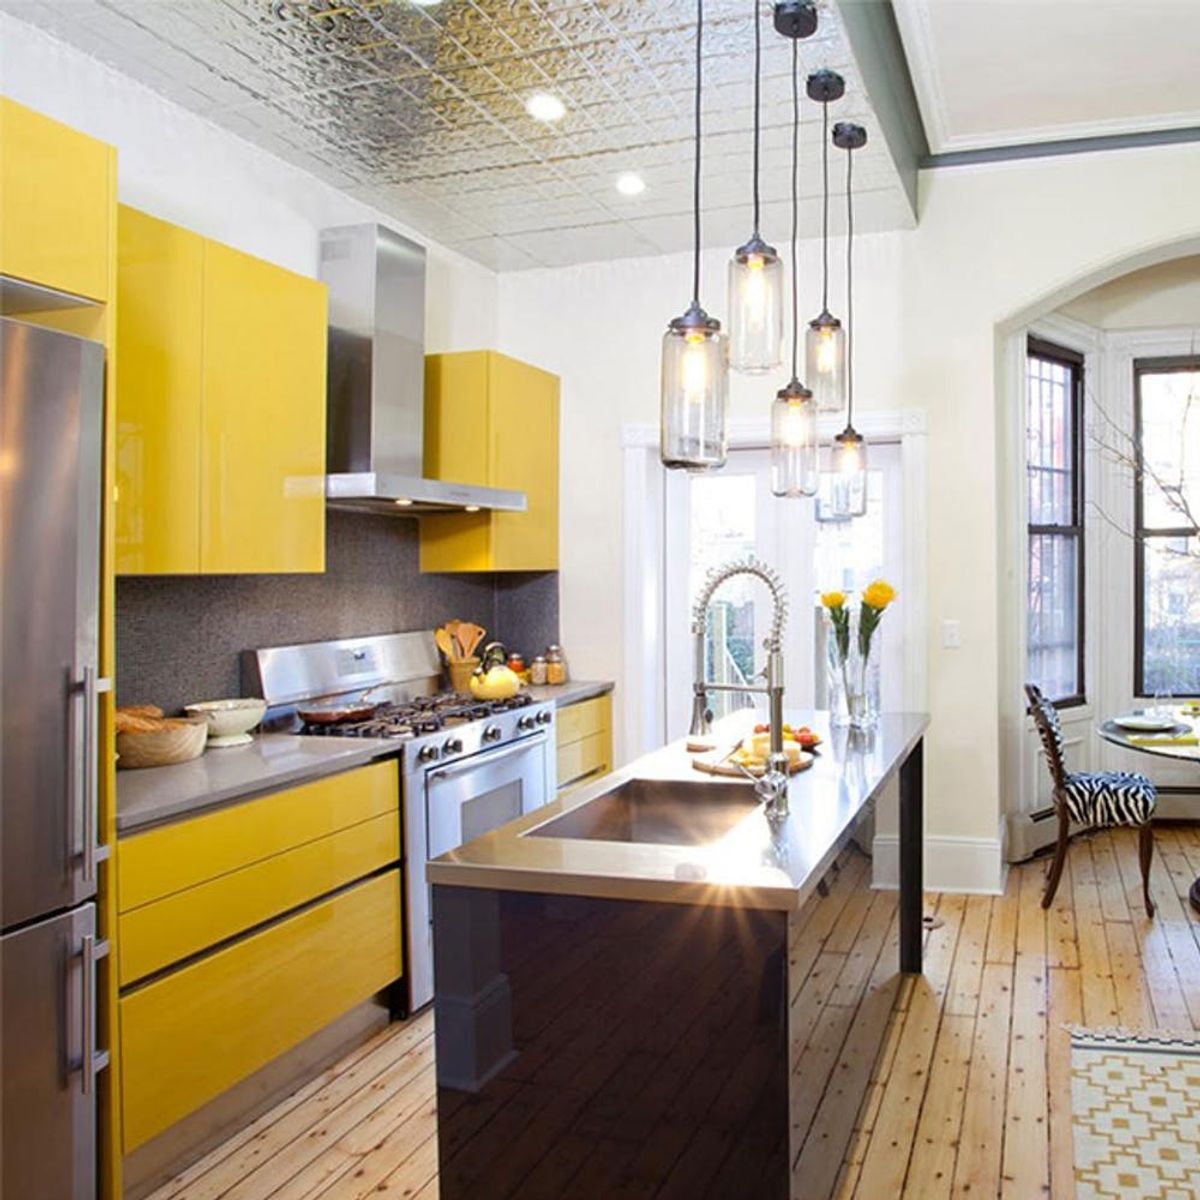 11 Home Renovations That Will Make You Want to Remodel STAT - Brit + Co